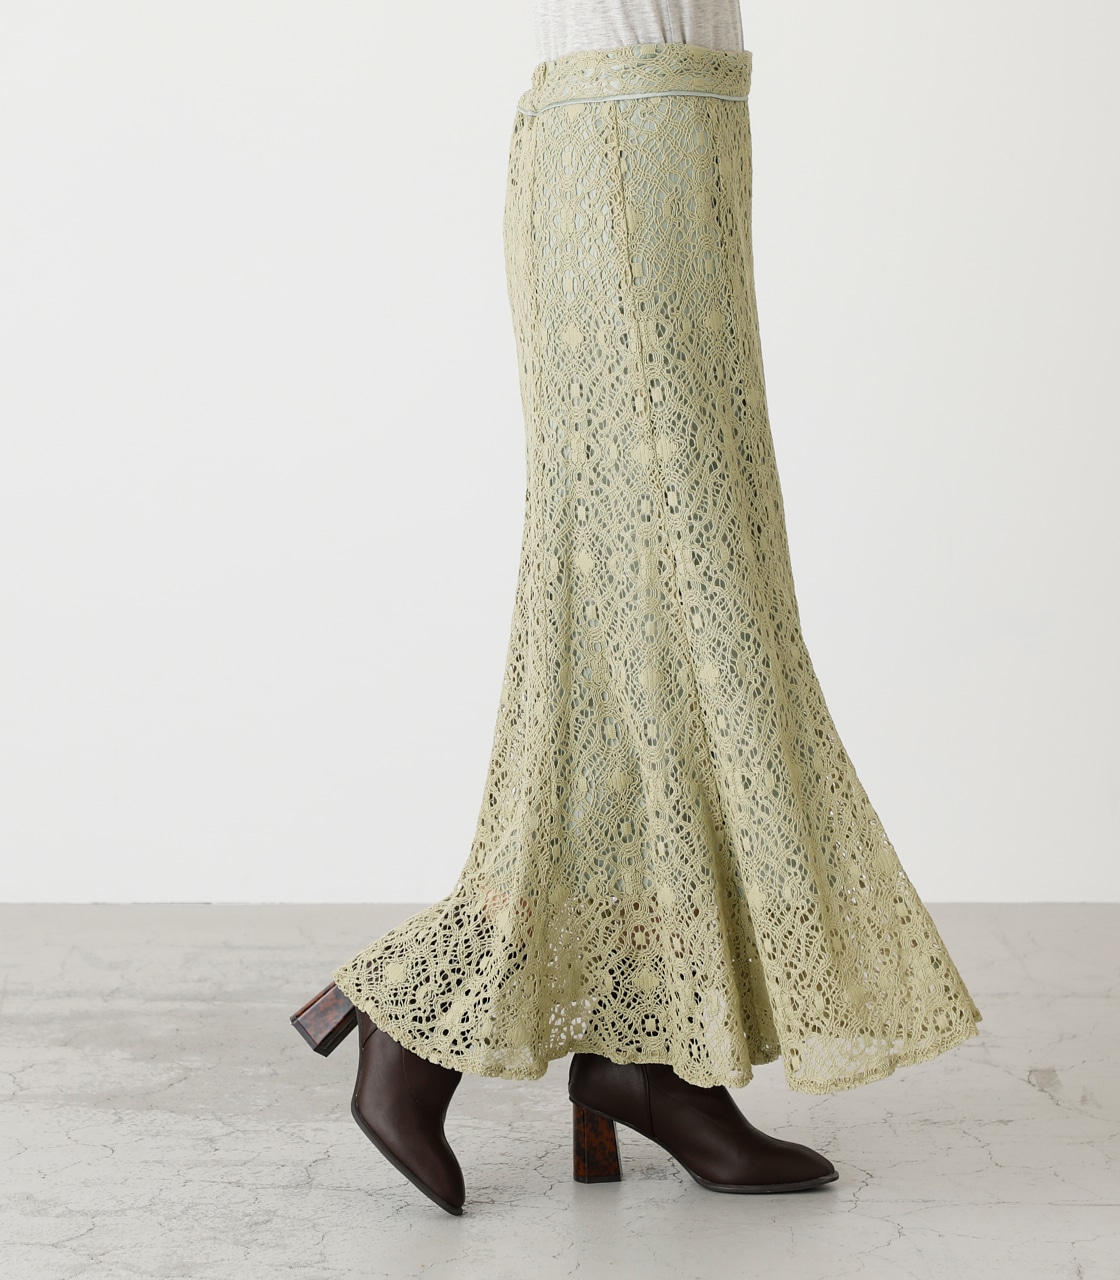 LACE NARROW SKIRT/レースナロースカート 詳細画像 LIME 2